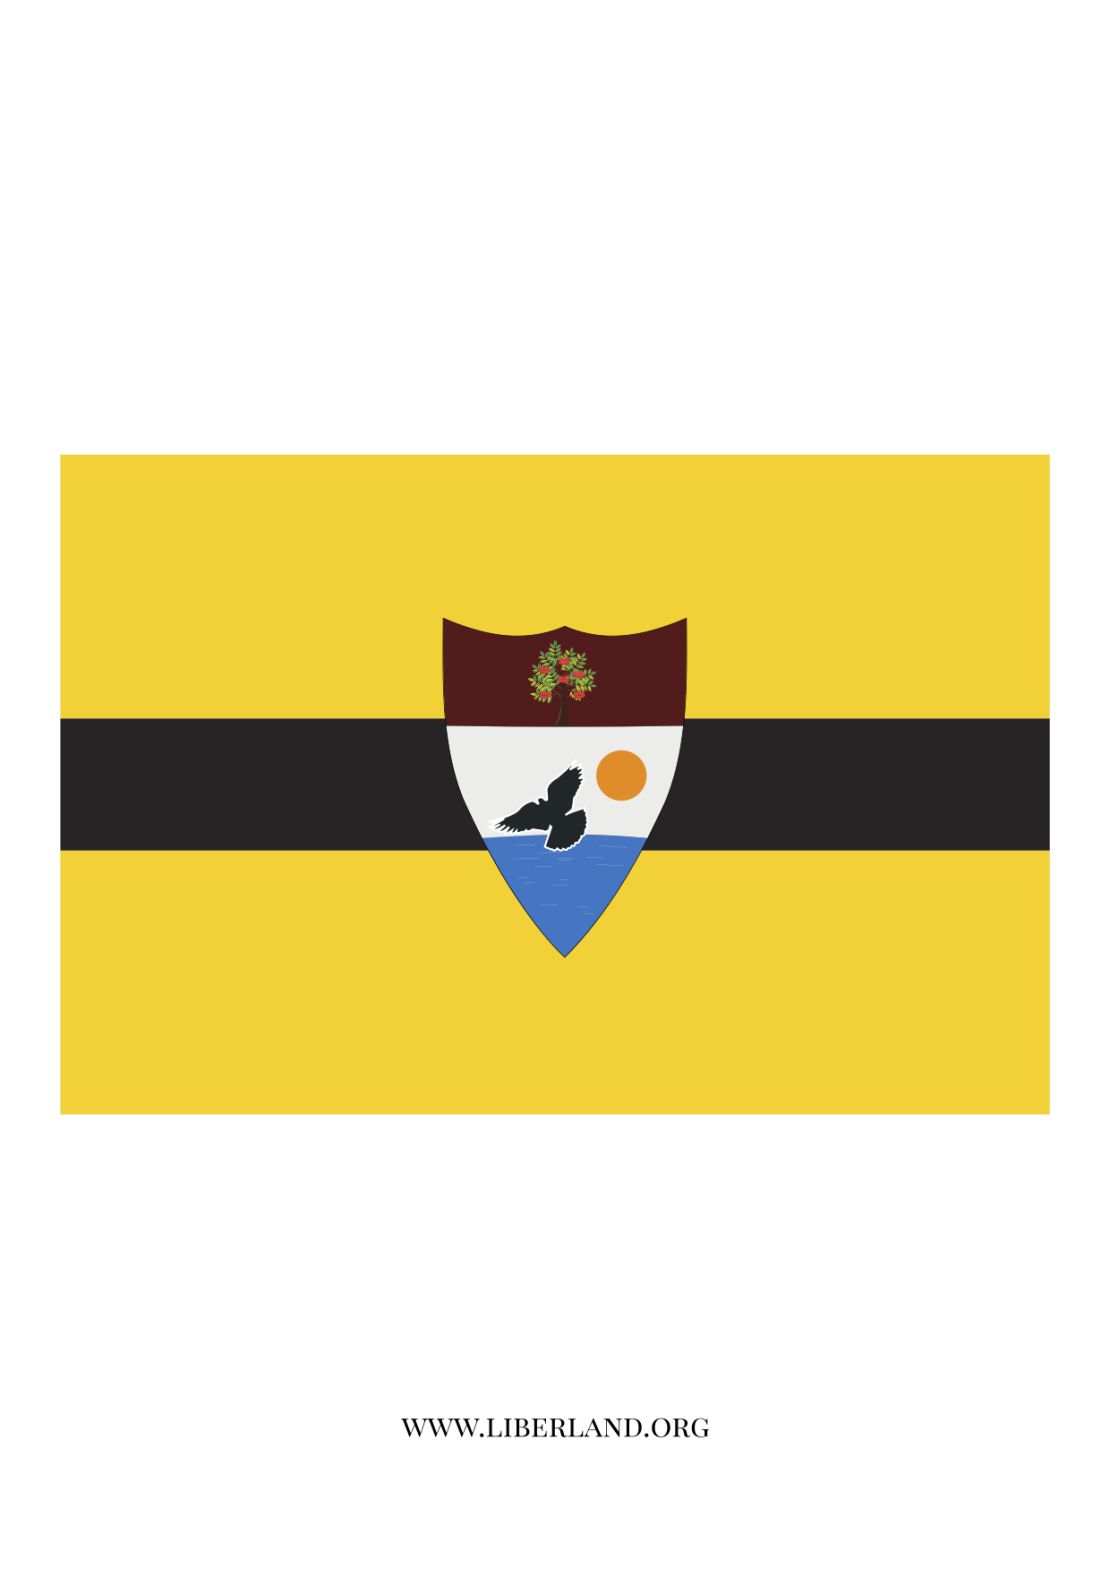 The flag of Liberland, the nascent 'micro nation' established by libertarian Czech politician Vit Jedlicka on April 13, 2015.